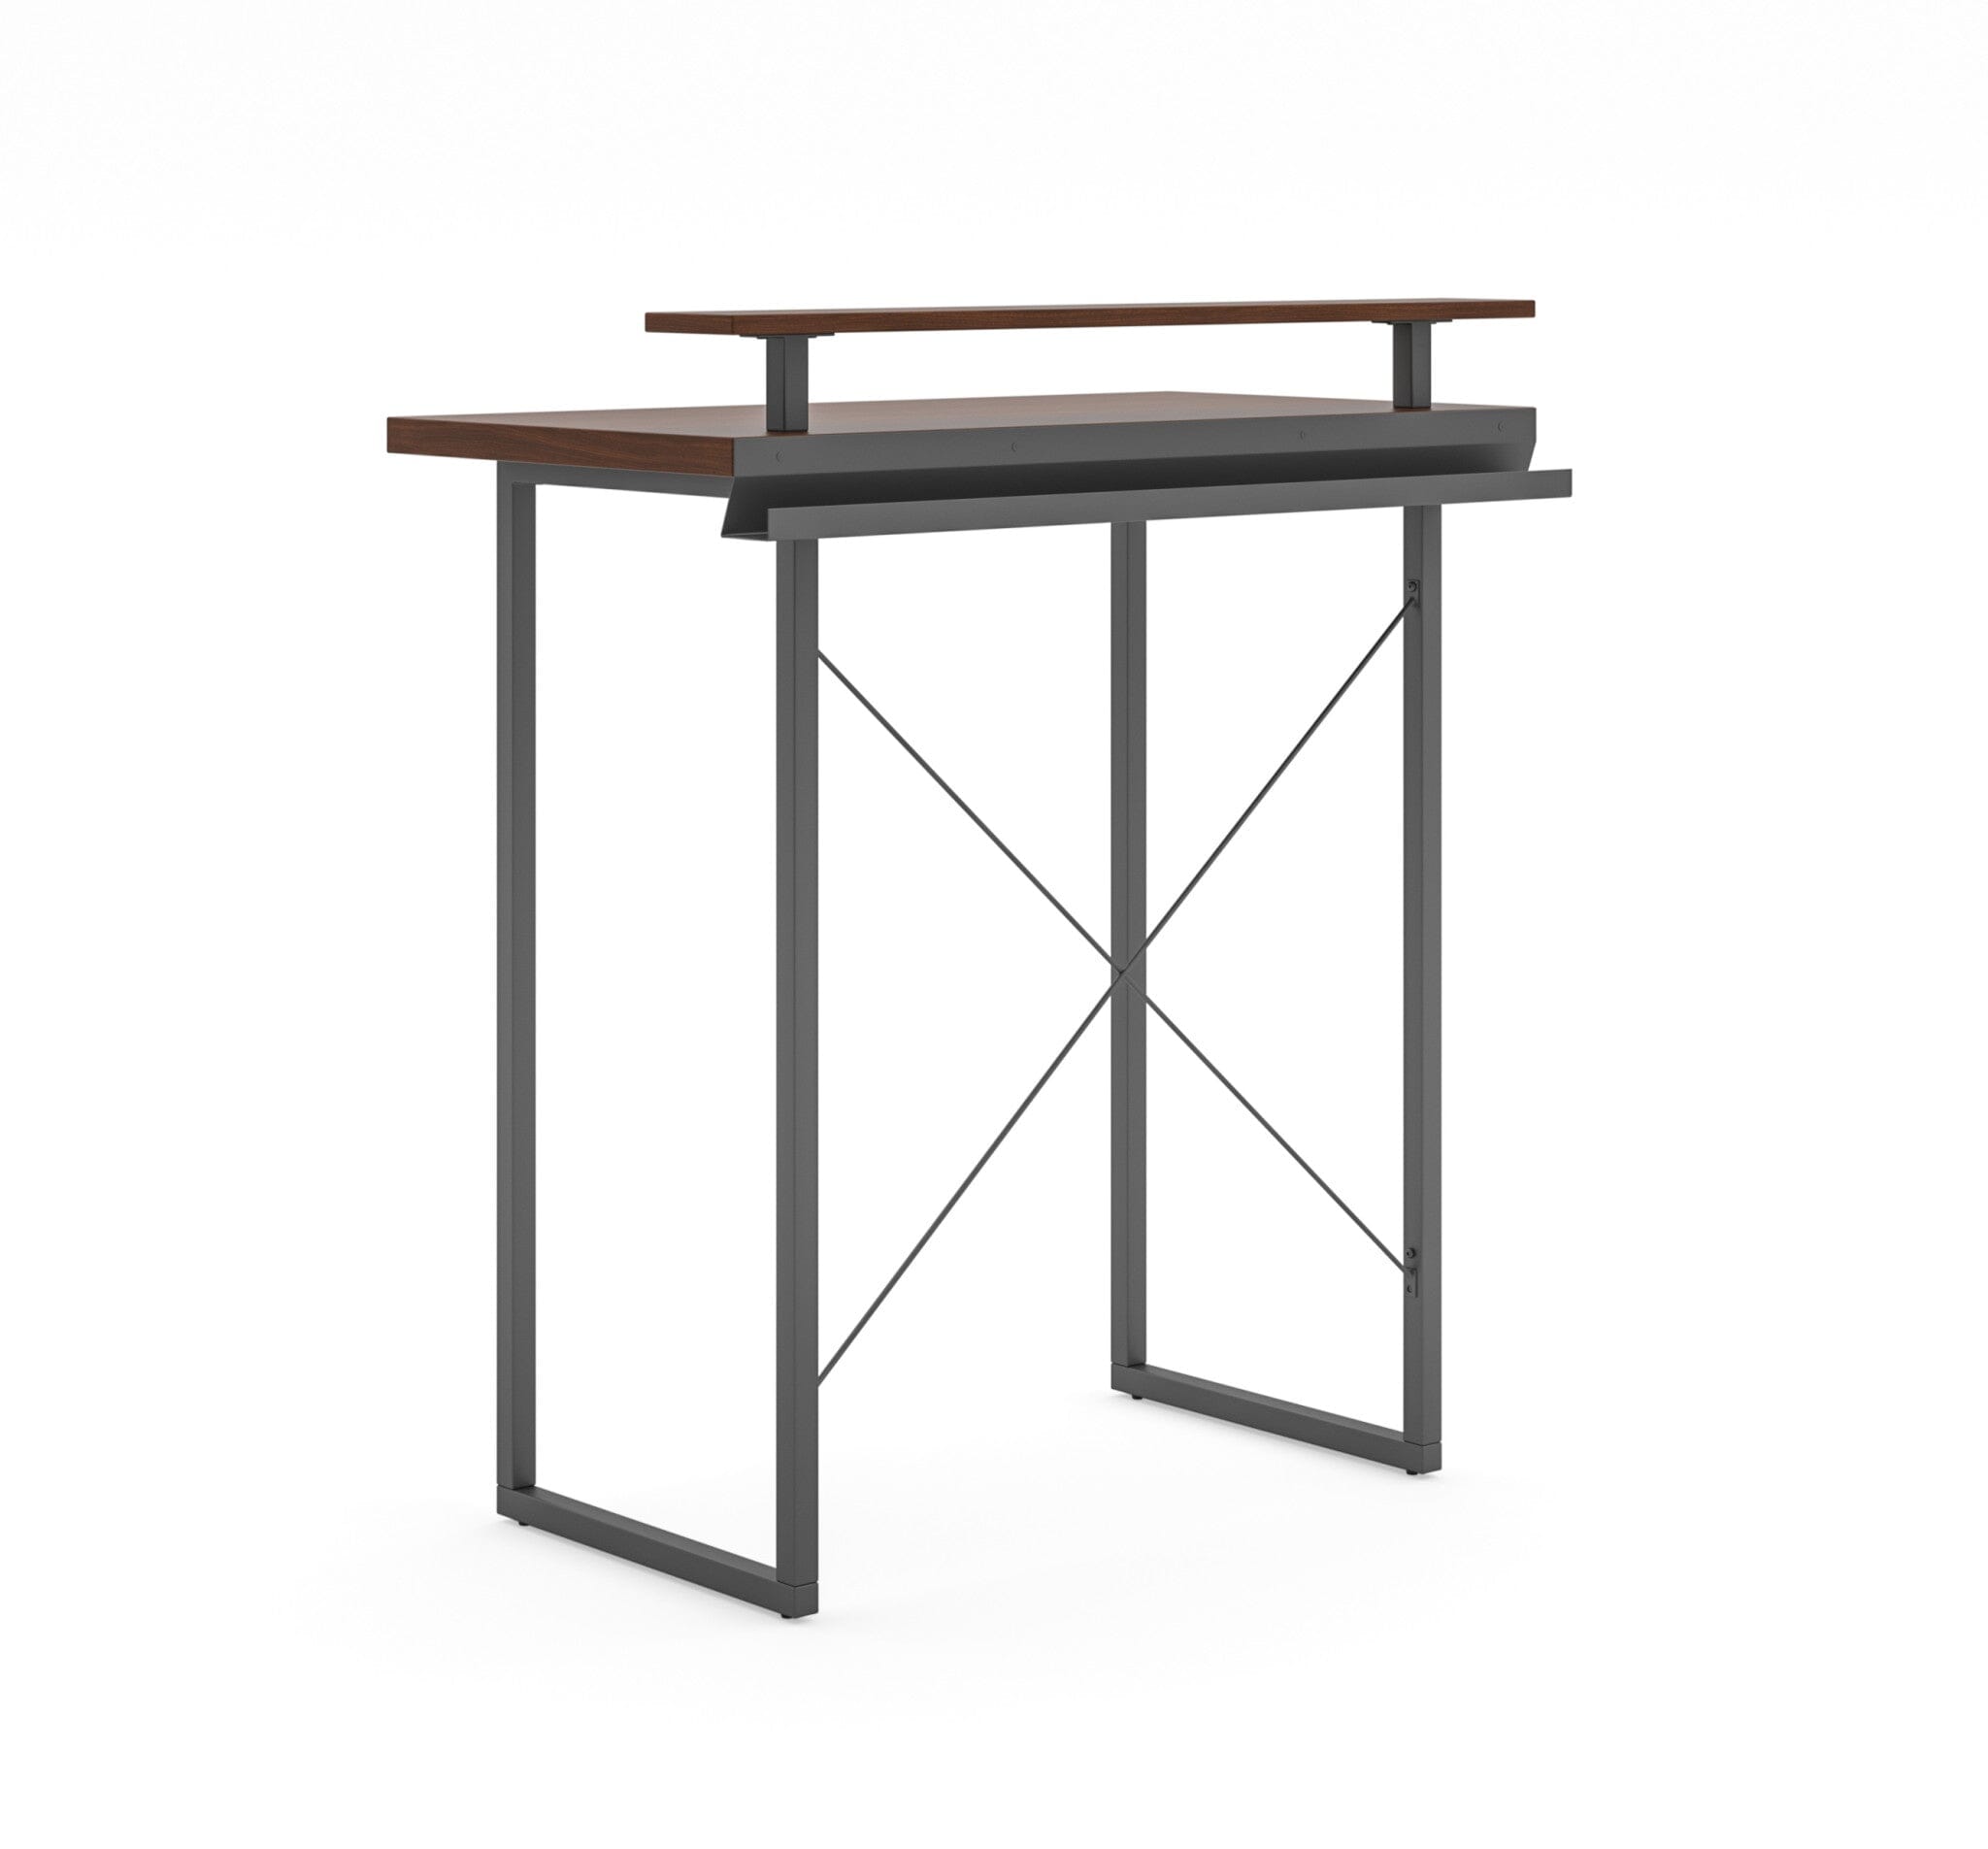 Modern & Contemporary Standing Desk with Monitor Stand By Merge Desk Merge